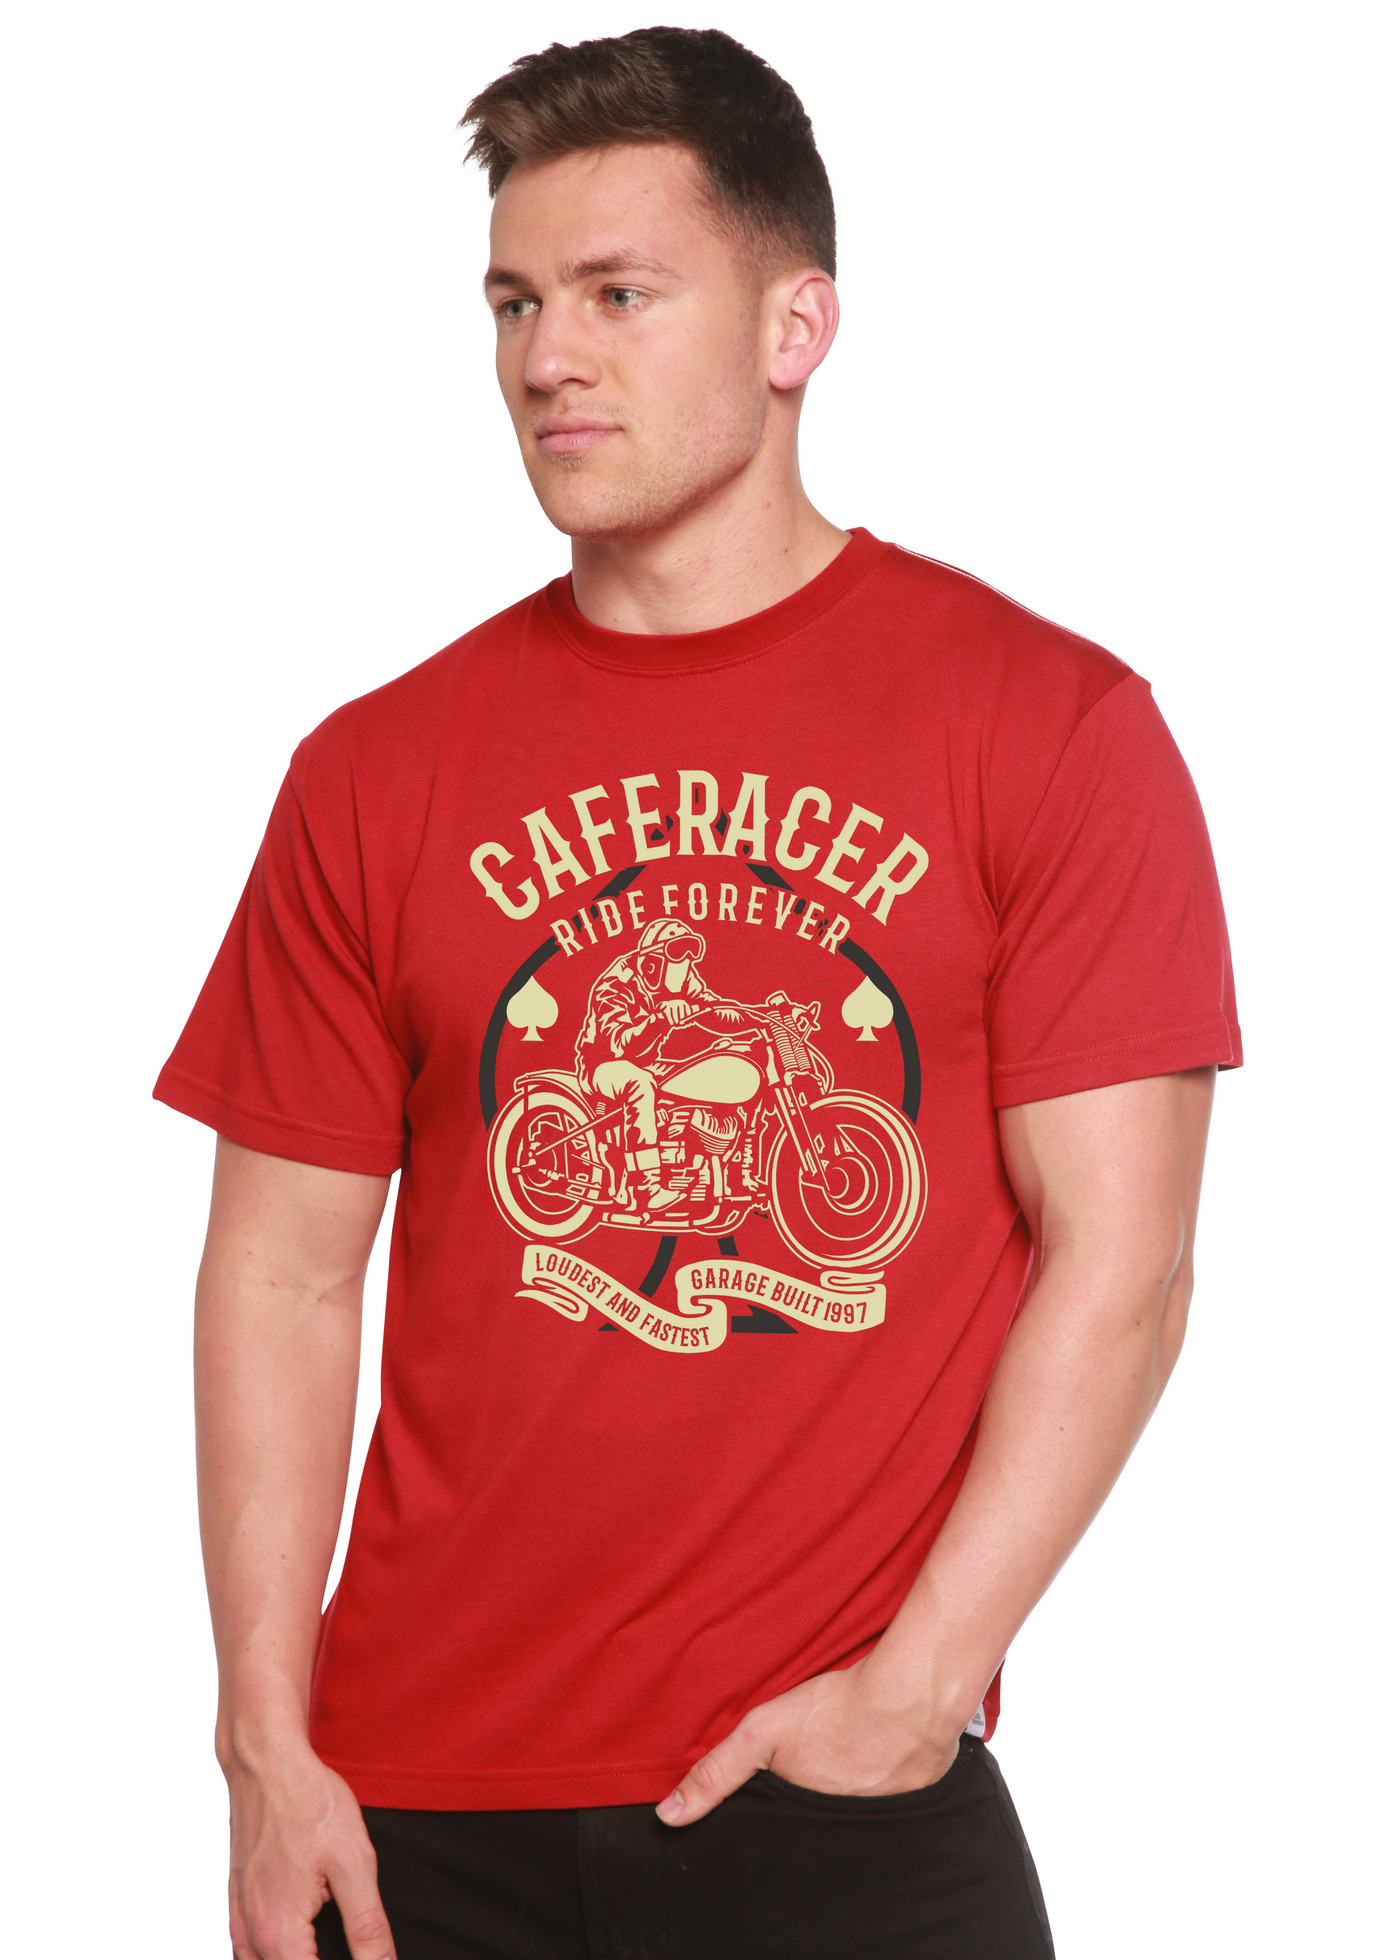 Caferacer Ride Forever men's bamboo tshirt pompeian red